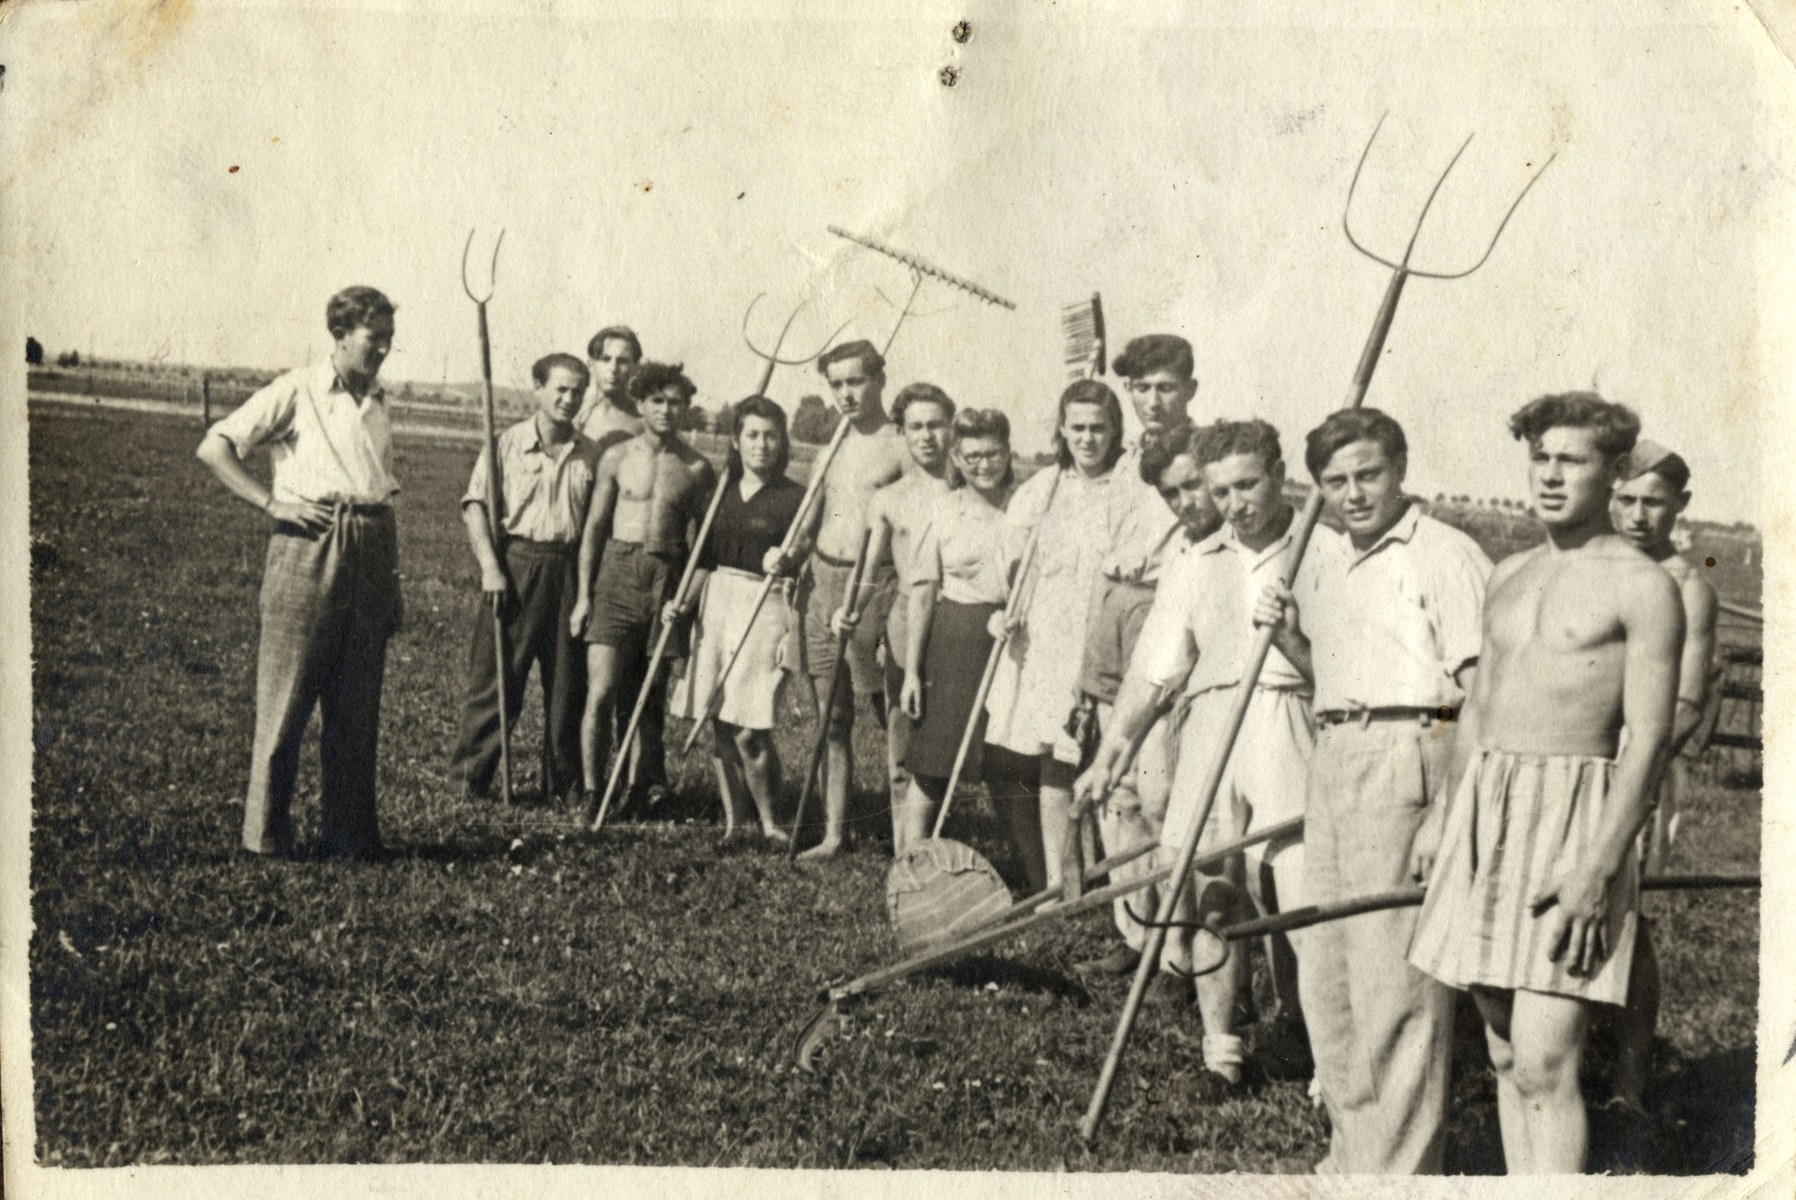 Group portrait of Jewish youth holding farming tools in a kibbutz hachshara in Germany.  

Standing on the far left is probably the donor, Henryk Bergman.